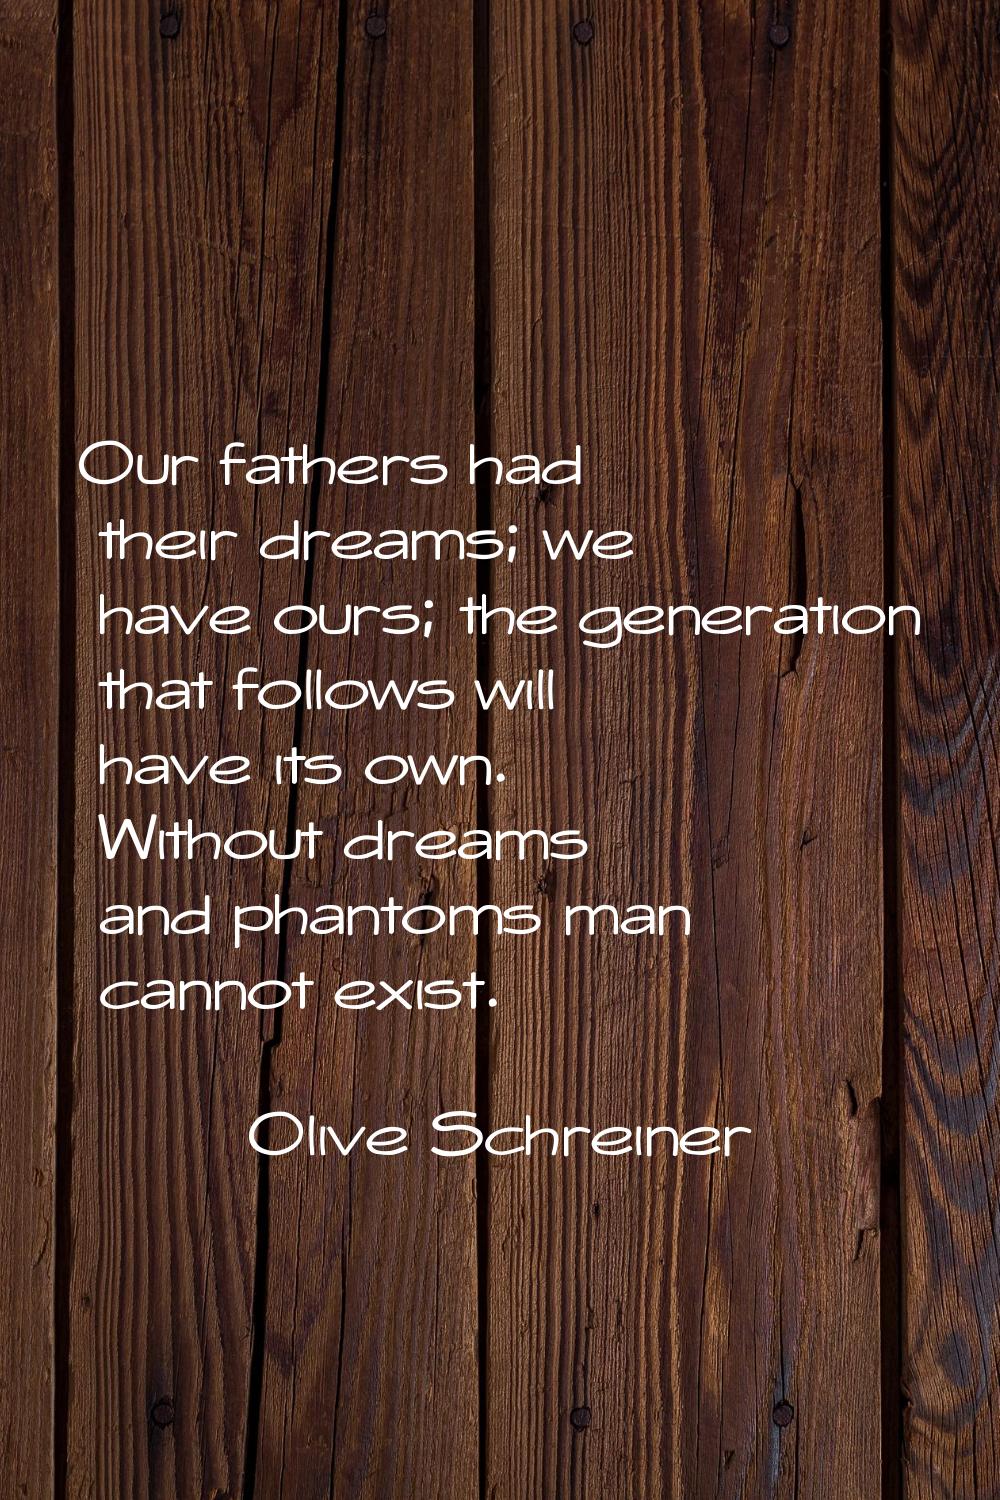 Our fathers had their dreams; we have ours; the generation that follows will have its own. Without 